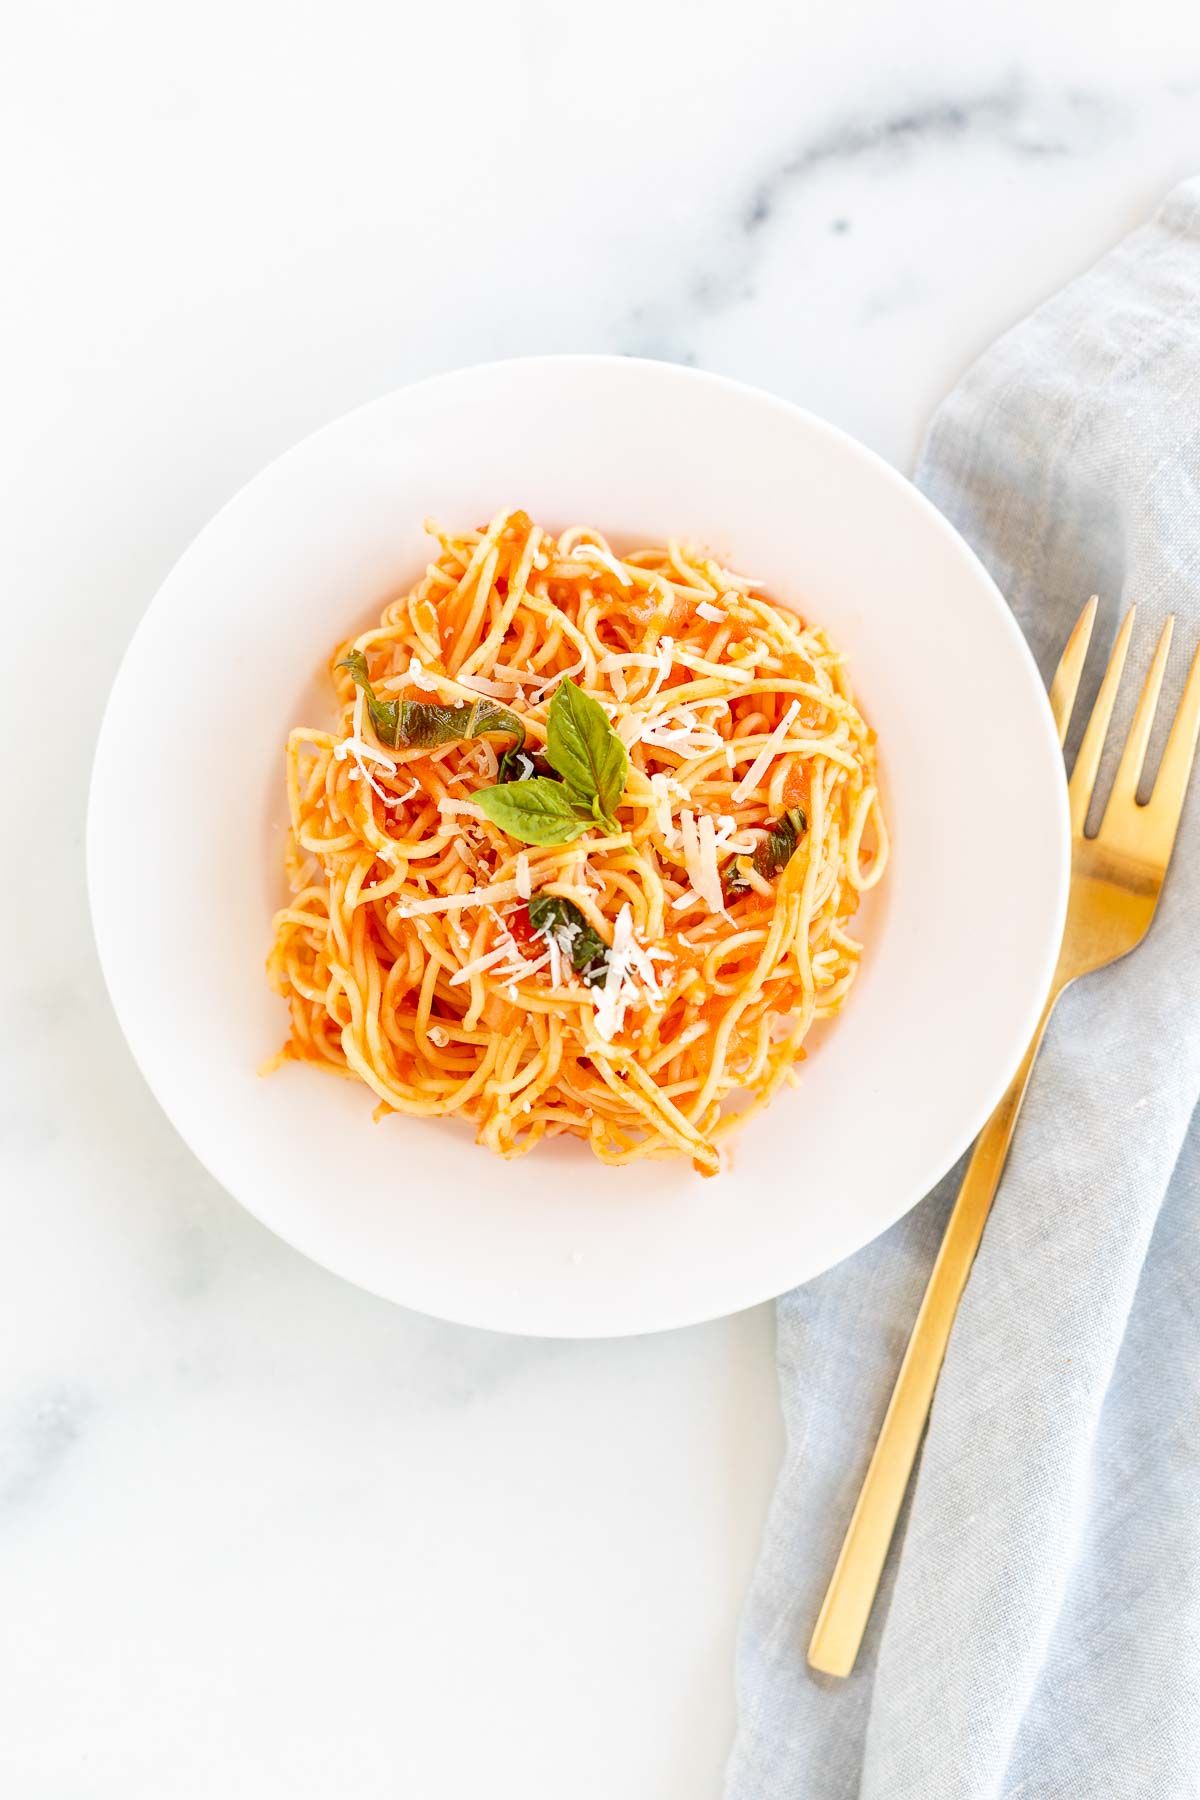 A white plate filled with pasta in a pomodoro sauce, gold fork to the side